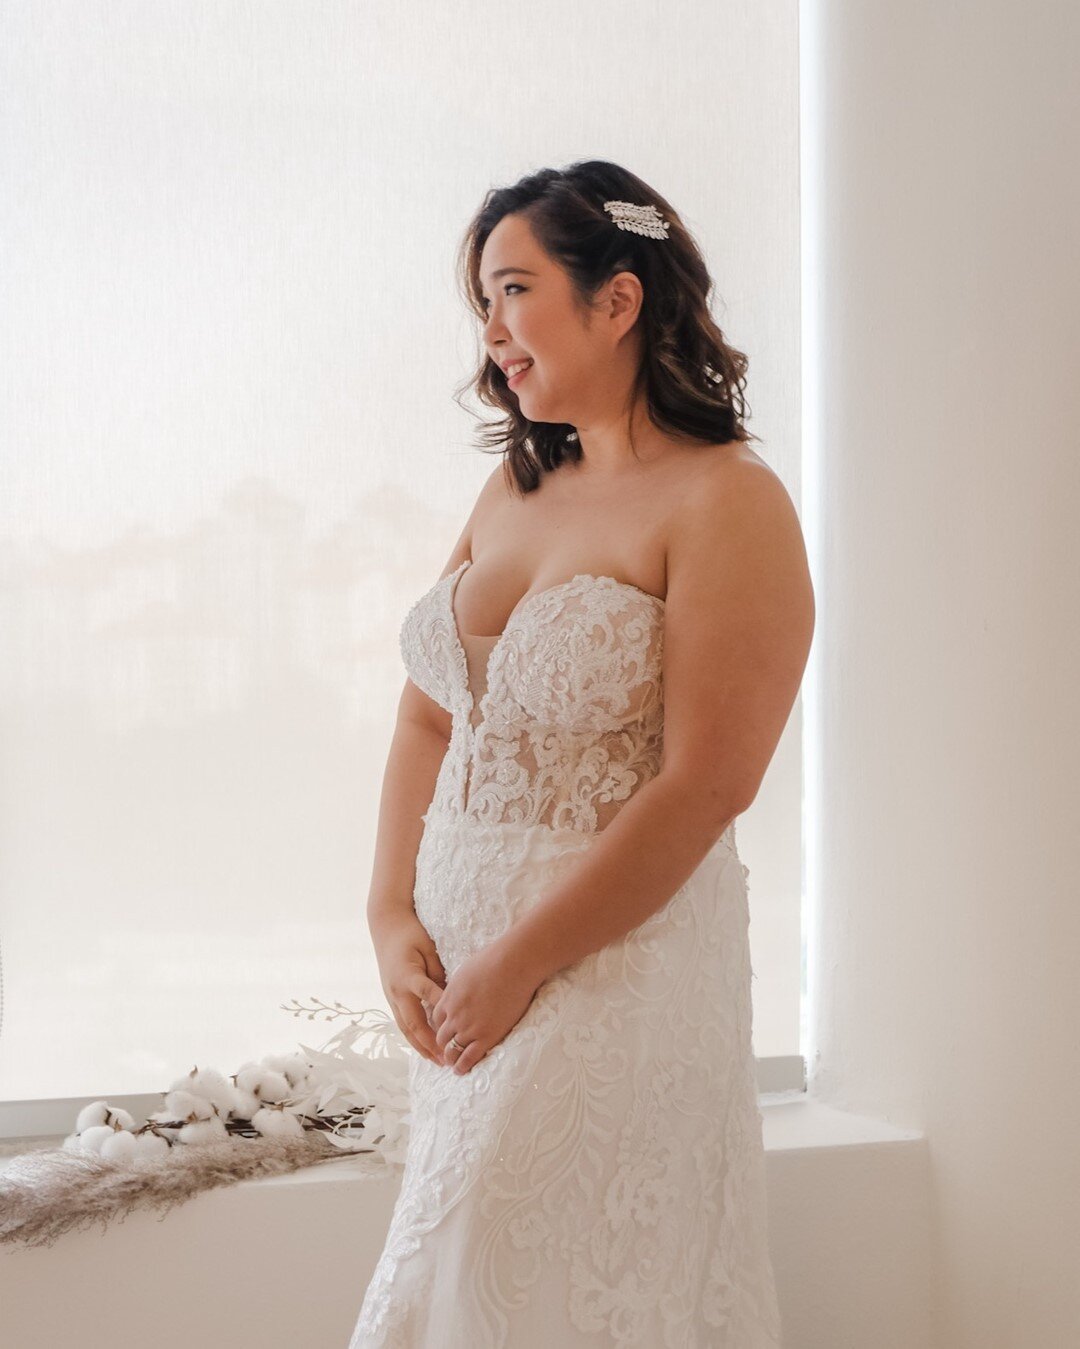 Bold and sweet, all in one! We love this look 🥰⠀⠀⠀⠀⠀⠀⠀⠀⠀
HMUA: @carina_beautybuzz⠀⠀⠀⠀⠀⠀⠀⠀⠀
.⠀⠀⠀⠀⠀⠀⠀⠀⠀
.⠀⠀⠀⠀⠀⠀⠀⠀⠀
.⠀⠀⠀⠀⠀⠀⠀⠀⠀
#bloomingbride #bridalstyle #beauty #singaporeweddings #sgbridalhmua #boldlook #sweet #lace #sweetheart #weddings #bridalfash